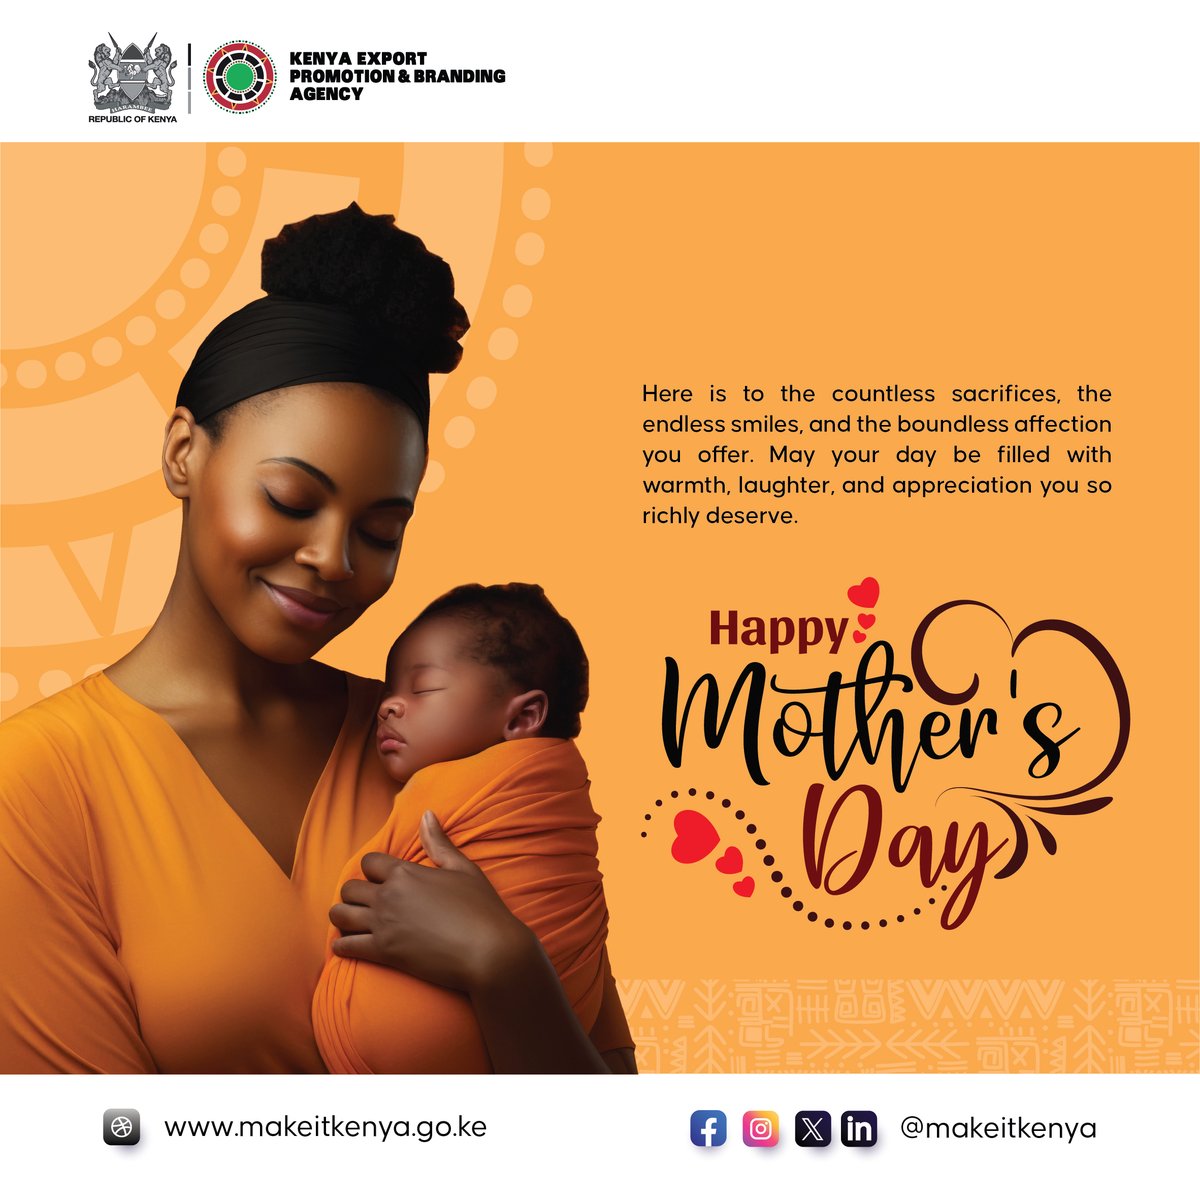 Here is to the countless sacrifices, the endless smiles, and the boundless affection you offer. May your day be filled with warmth, laughter, and appreciation you so richly deserve. Happy Mother's Day. #MothersDay